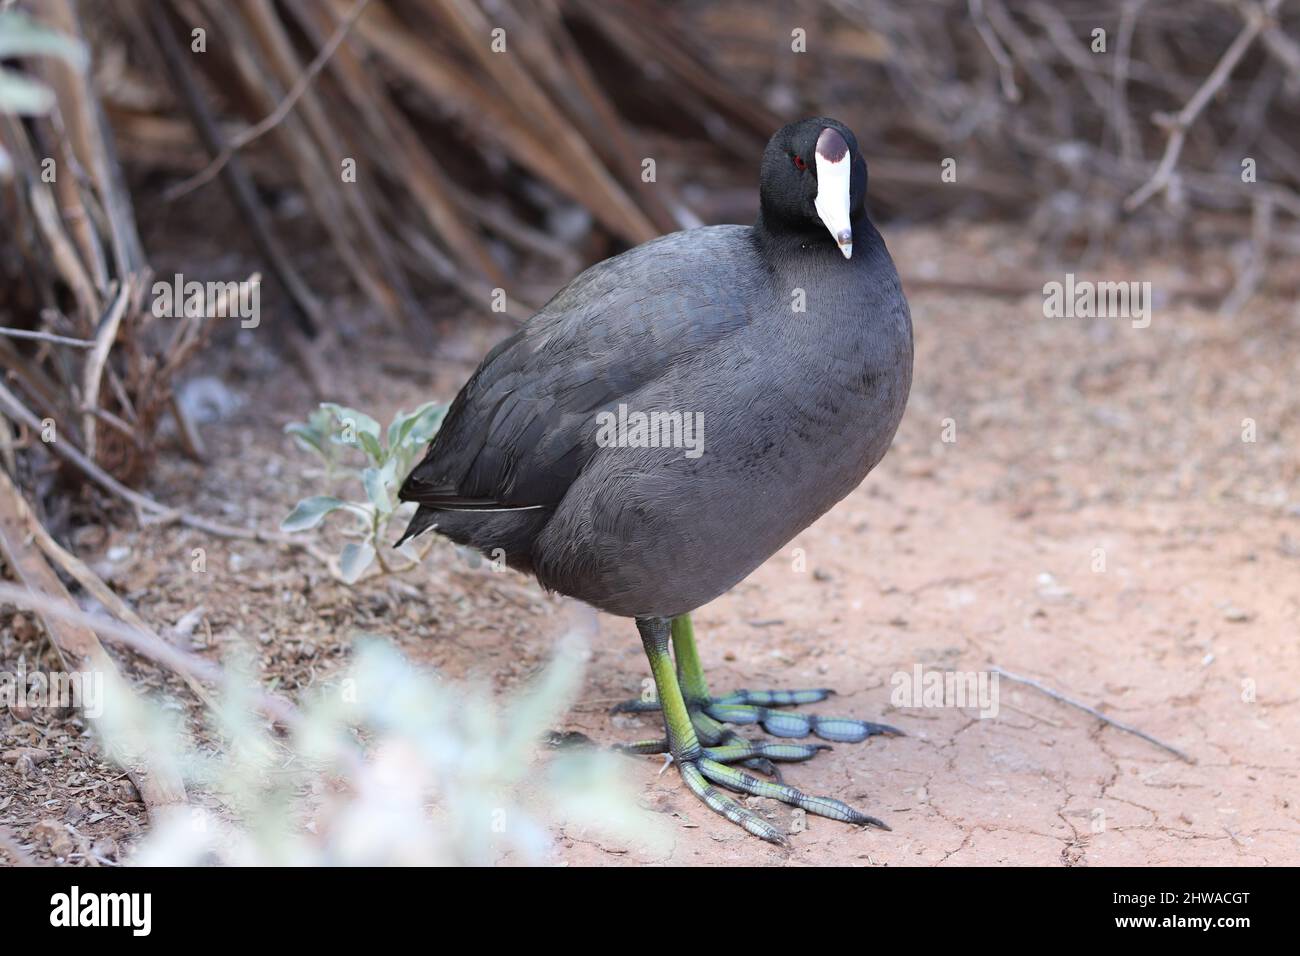 American Coot, Mud hen, or Fulica americana standing on shoreline at the Riparian at Water ranch in Arizona. Stock Photo